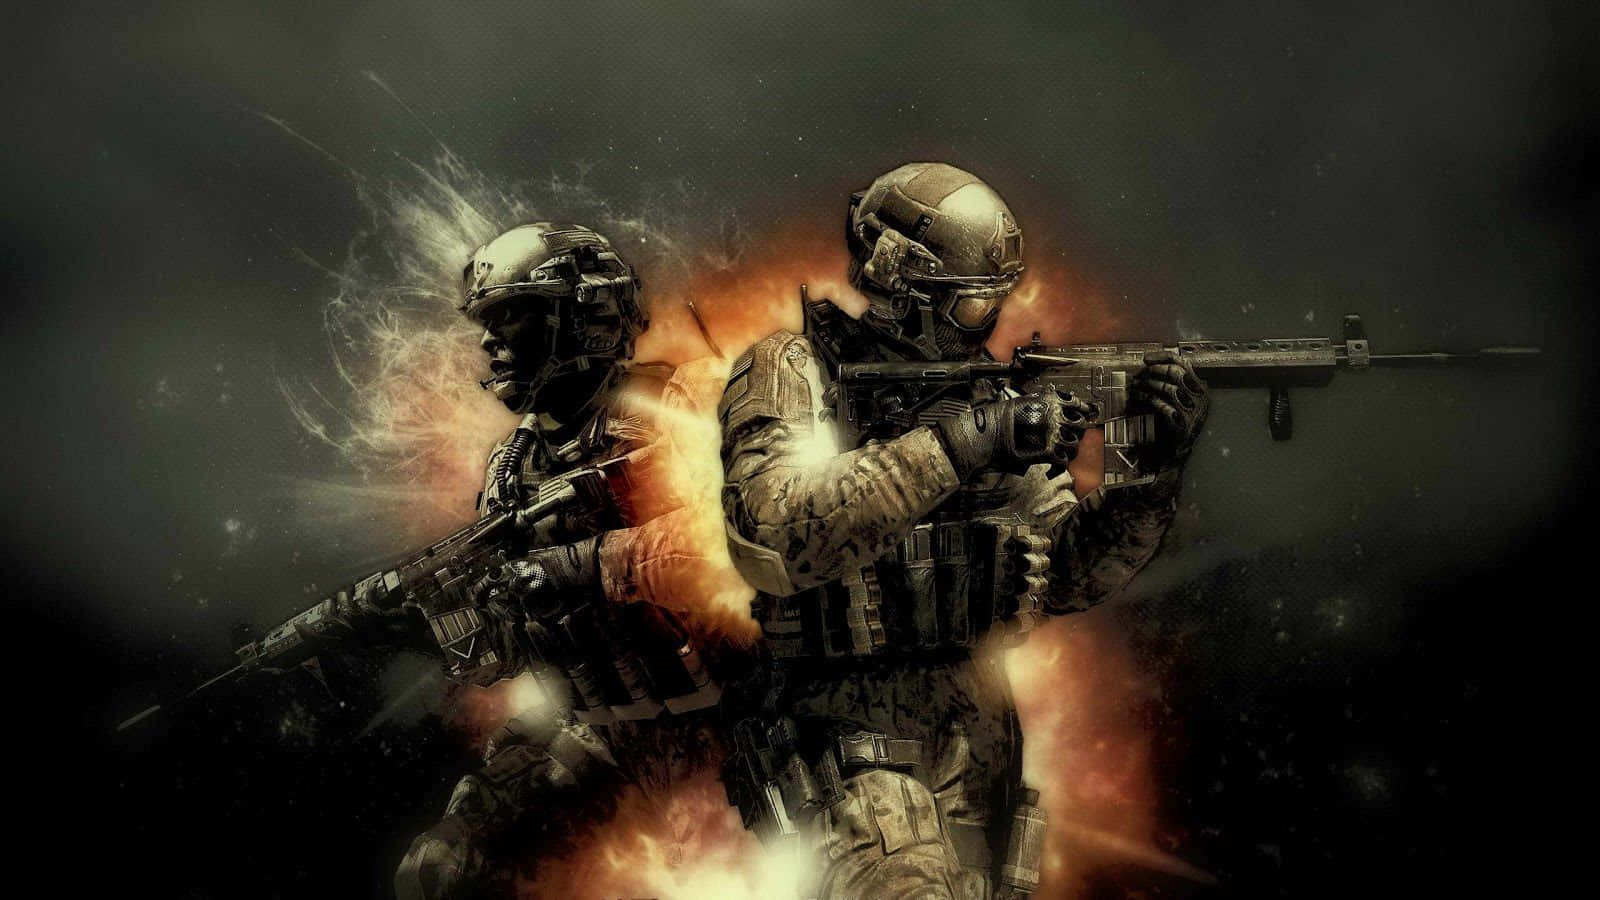 A soldier fighting in the heat of battle with Call of Duty: Black Ops Wallpaper